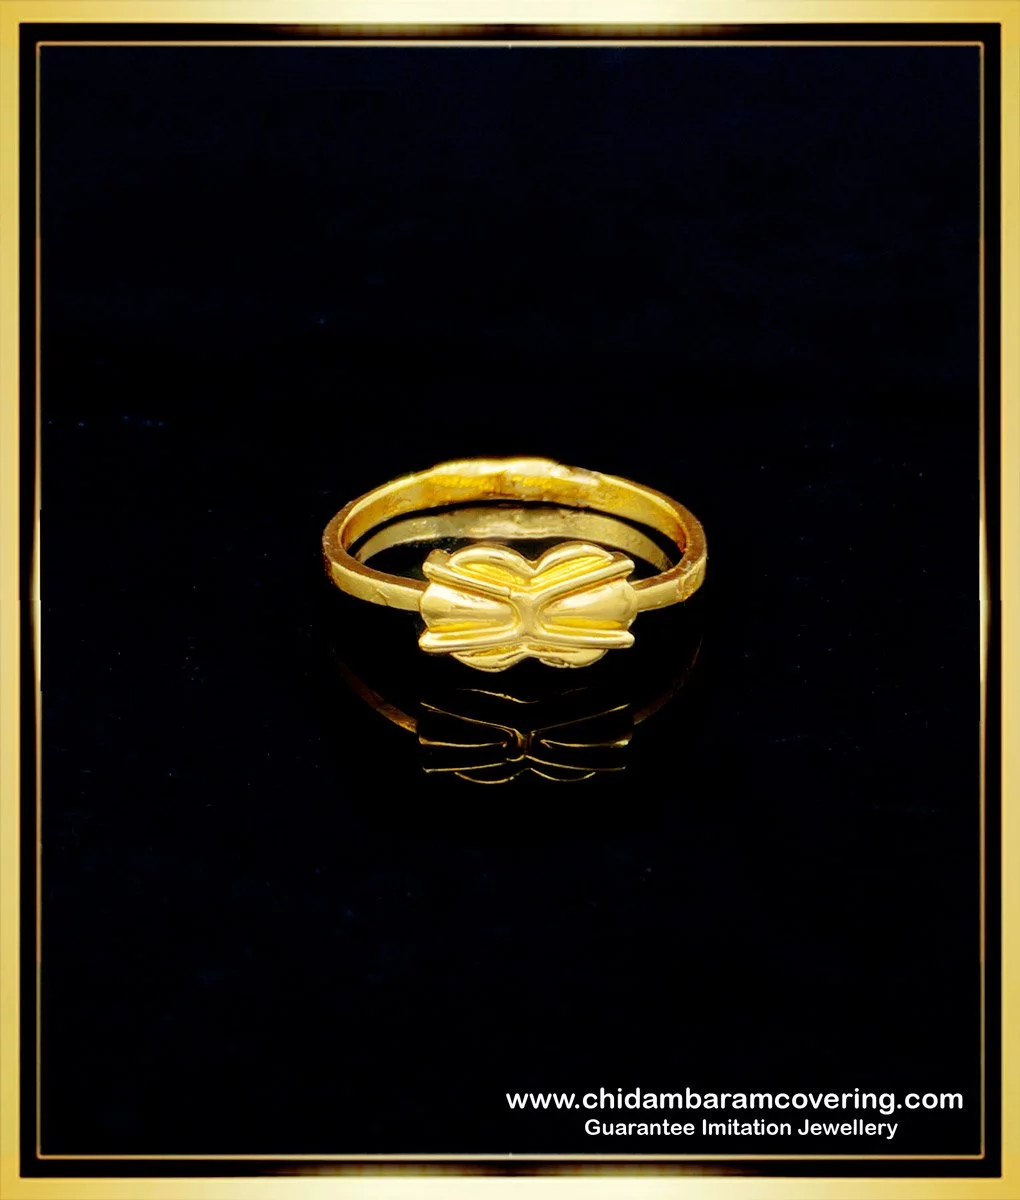 22K Fine Gold Ladies Ring, 3.7g at Rs 22200 in New Delhi | ID: 2852511292712